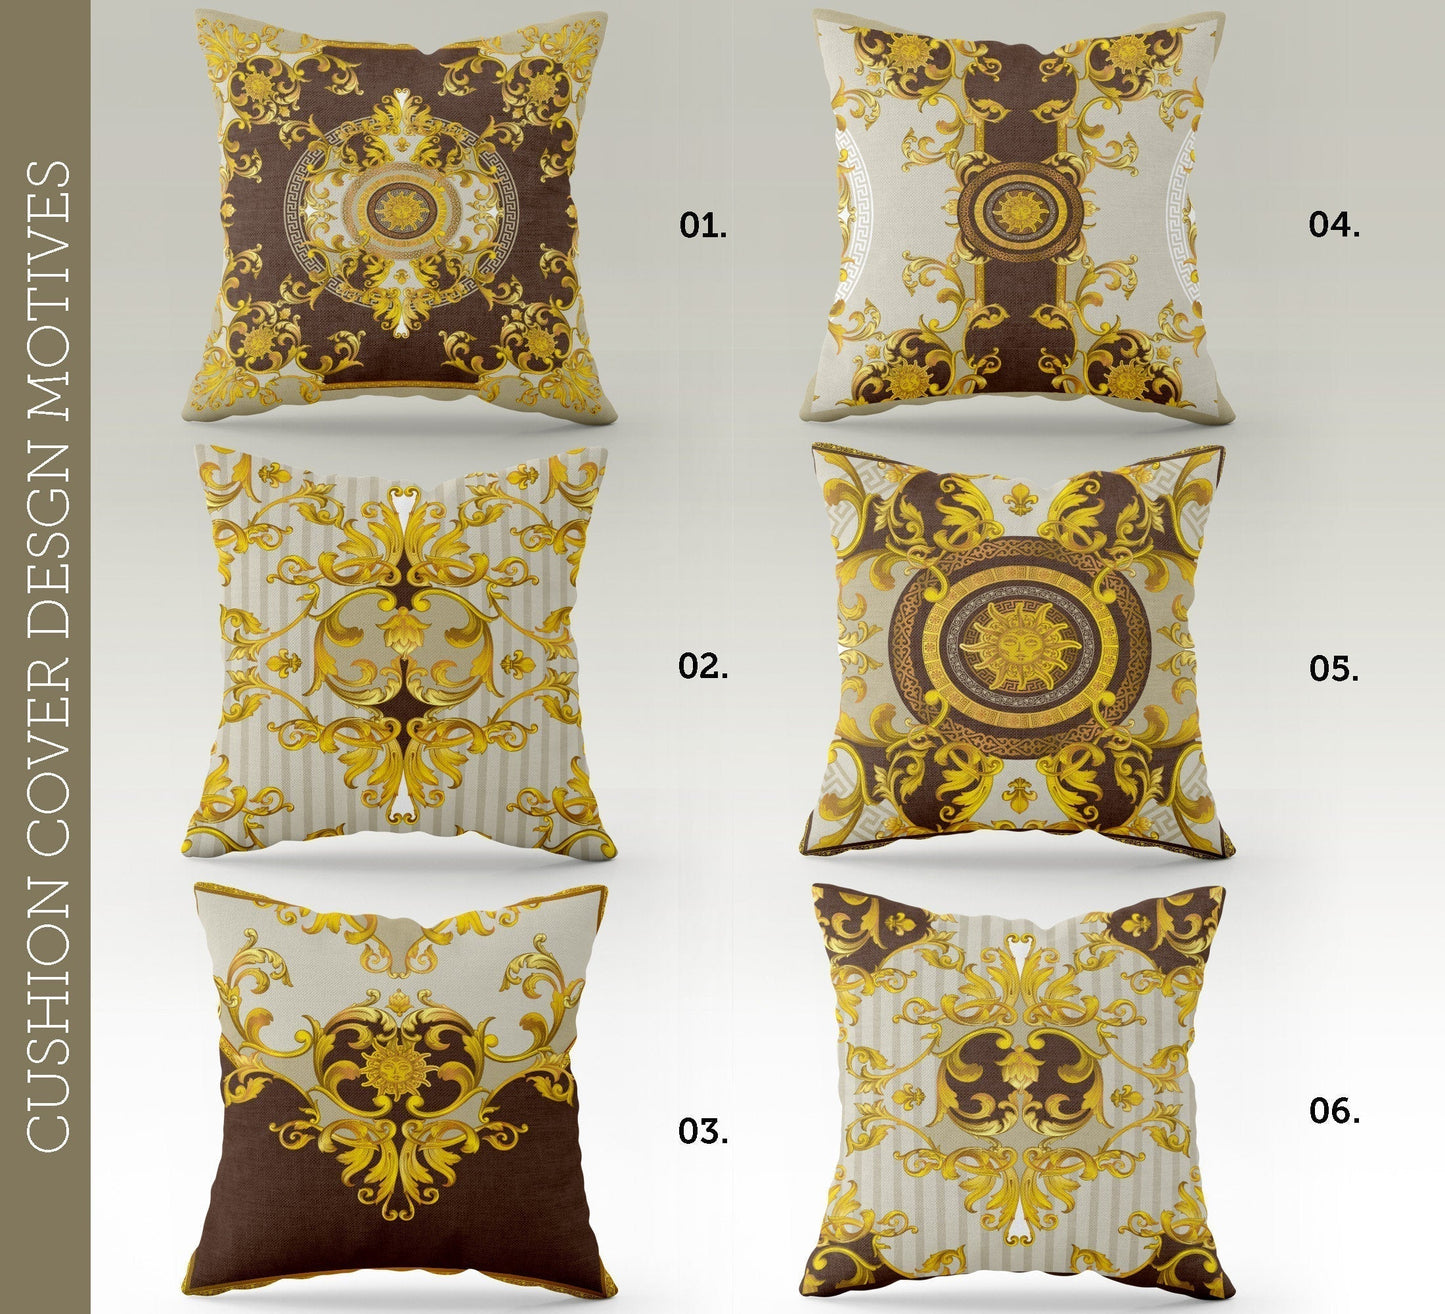 "Alice" cushion cover set • Art Gift • exclusive baroque classic design pillow covers • different sizes